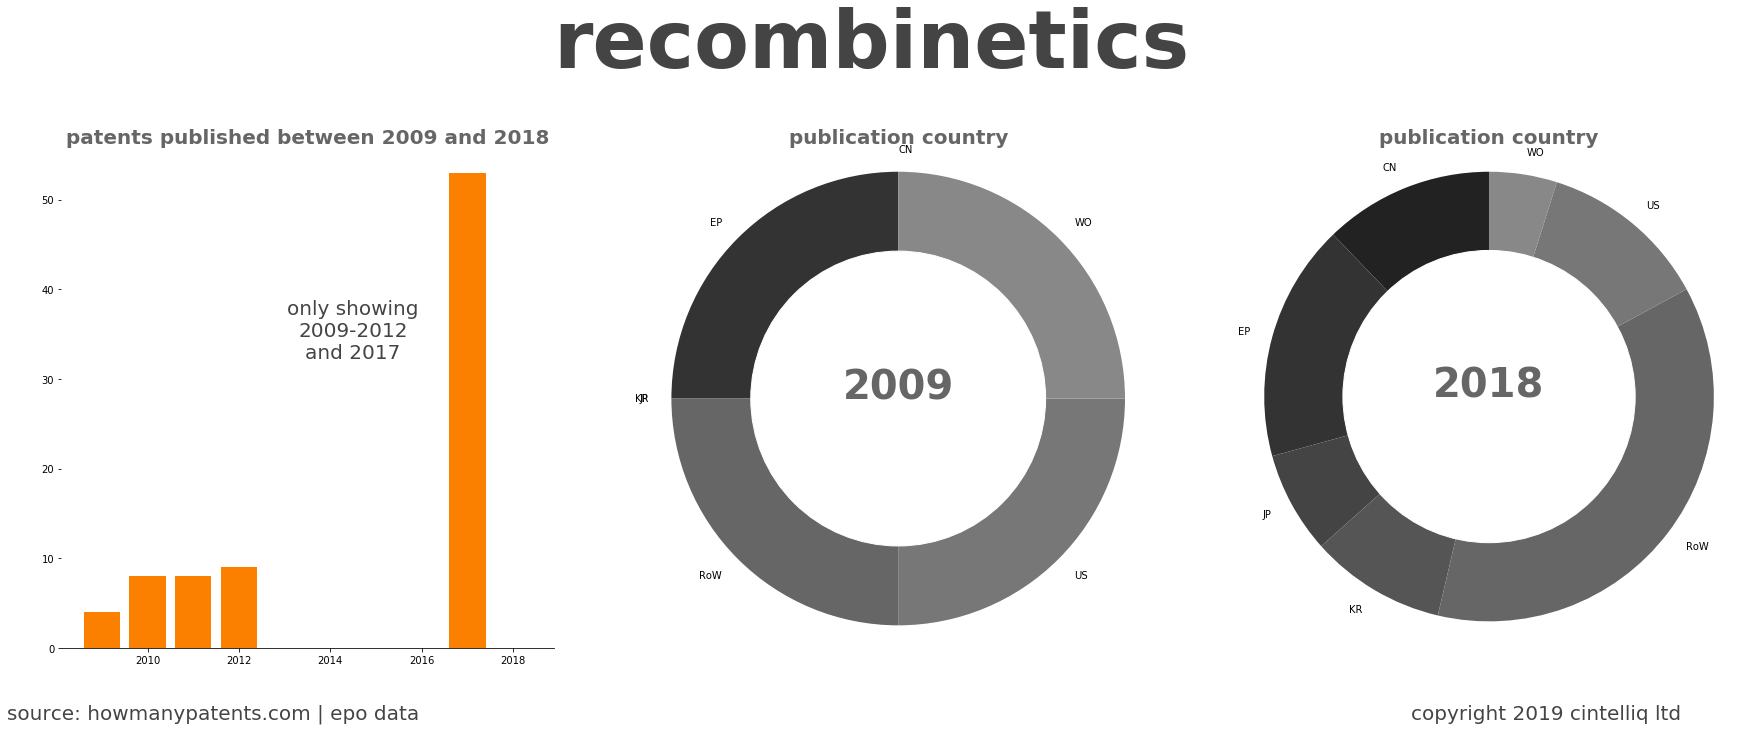 summary of patents for Recombinetics